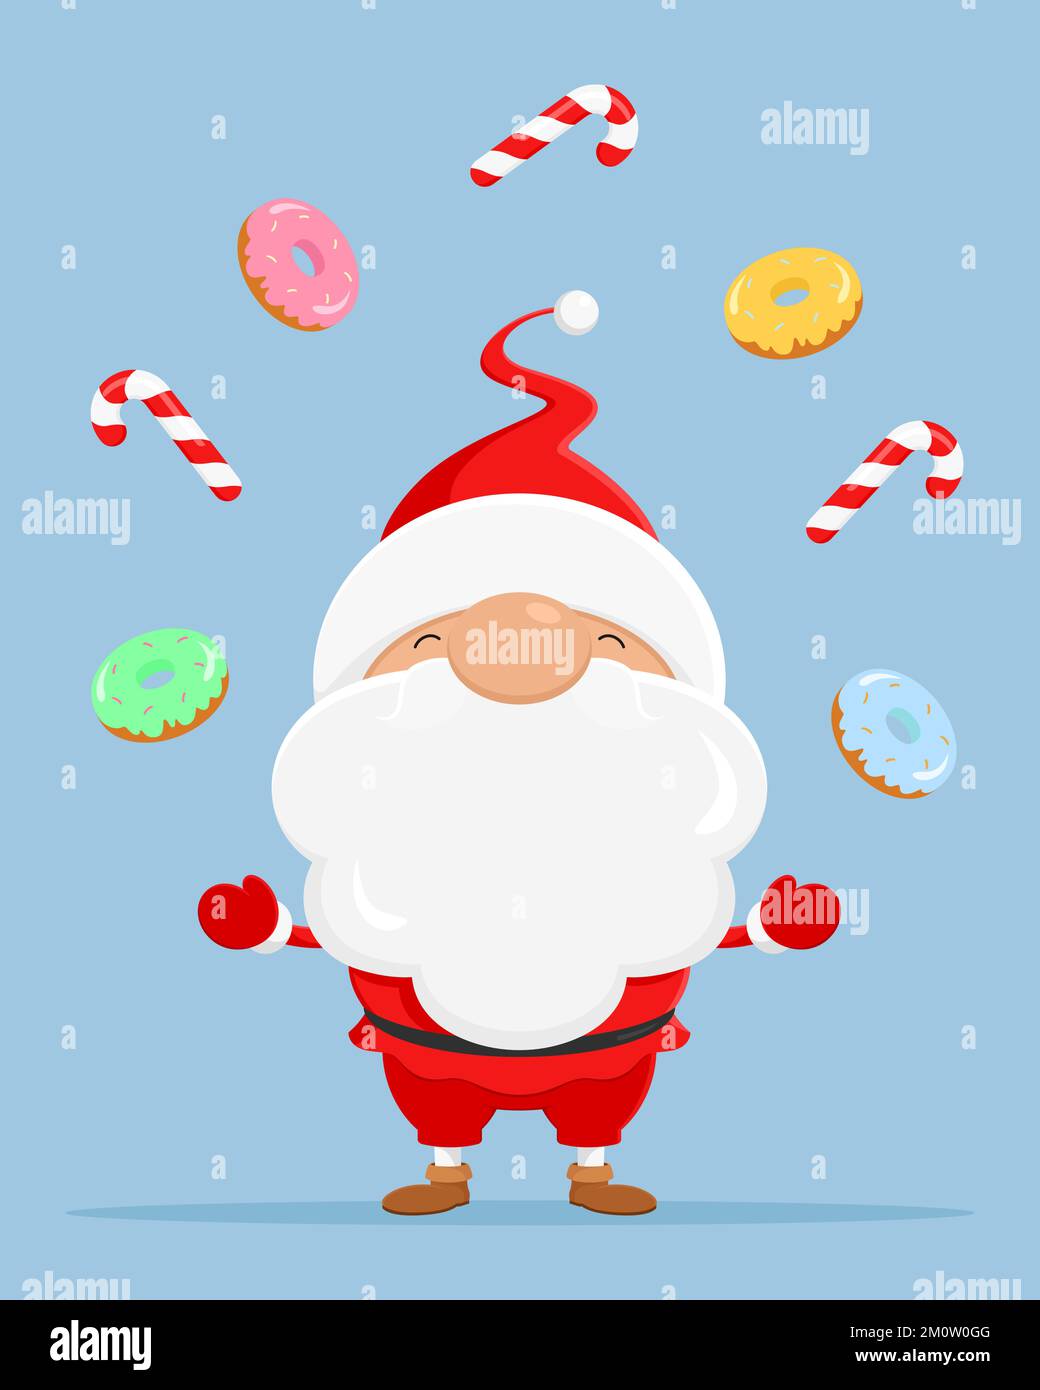 Santa juggles with candy canes and donuts. Vector illustration. Stock Vector